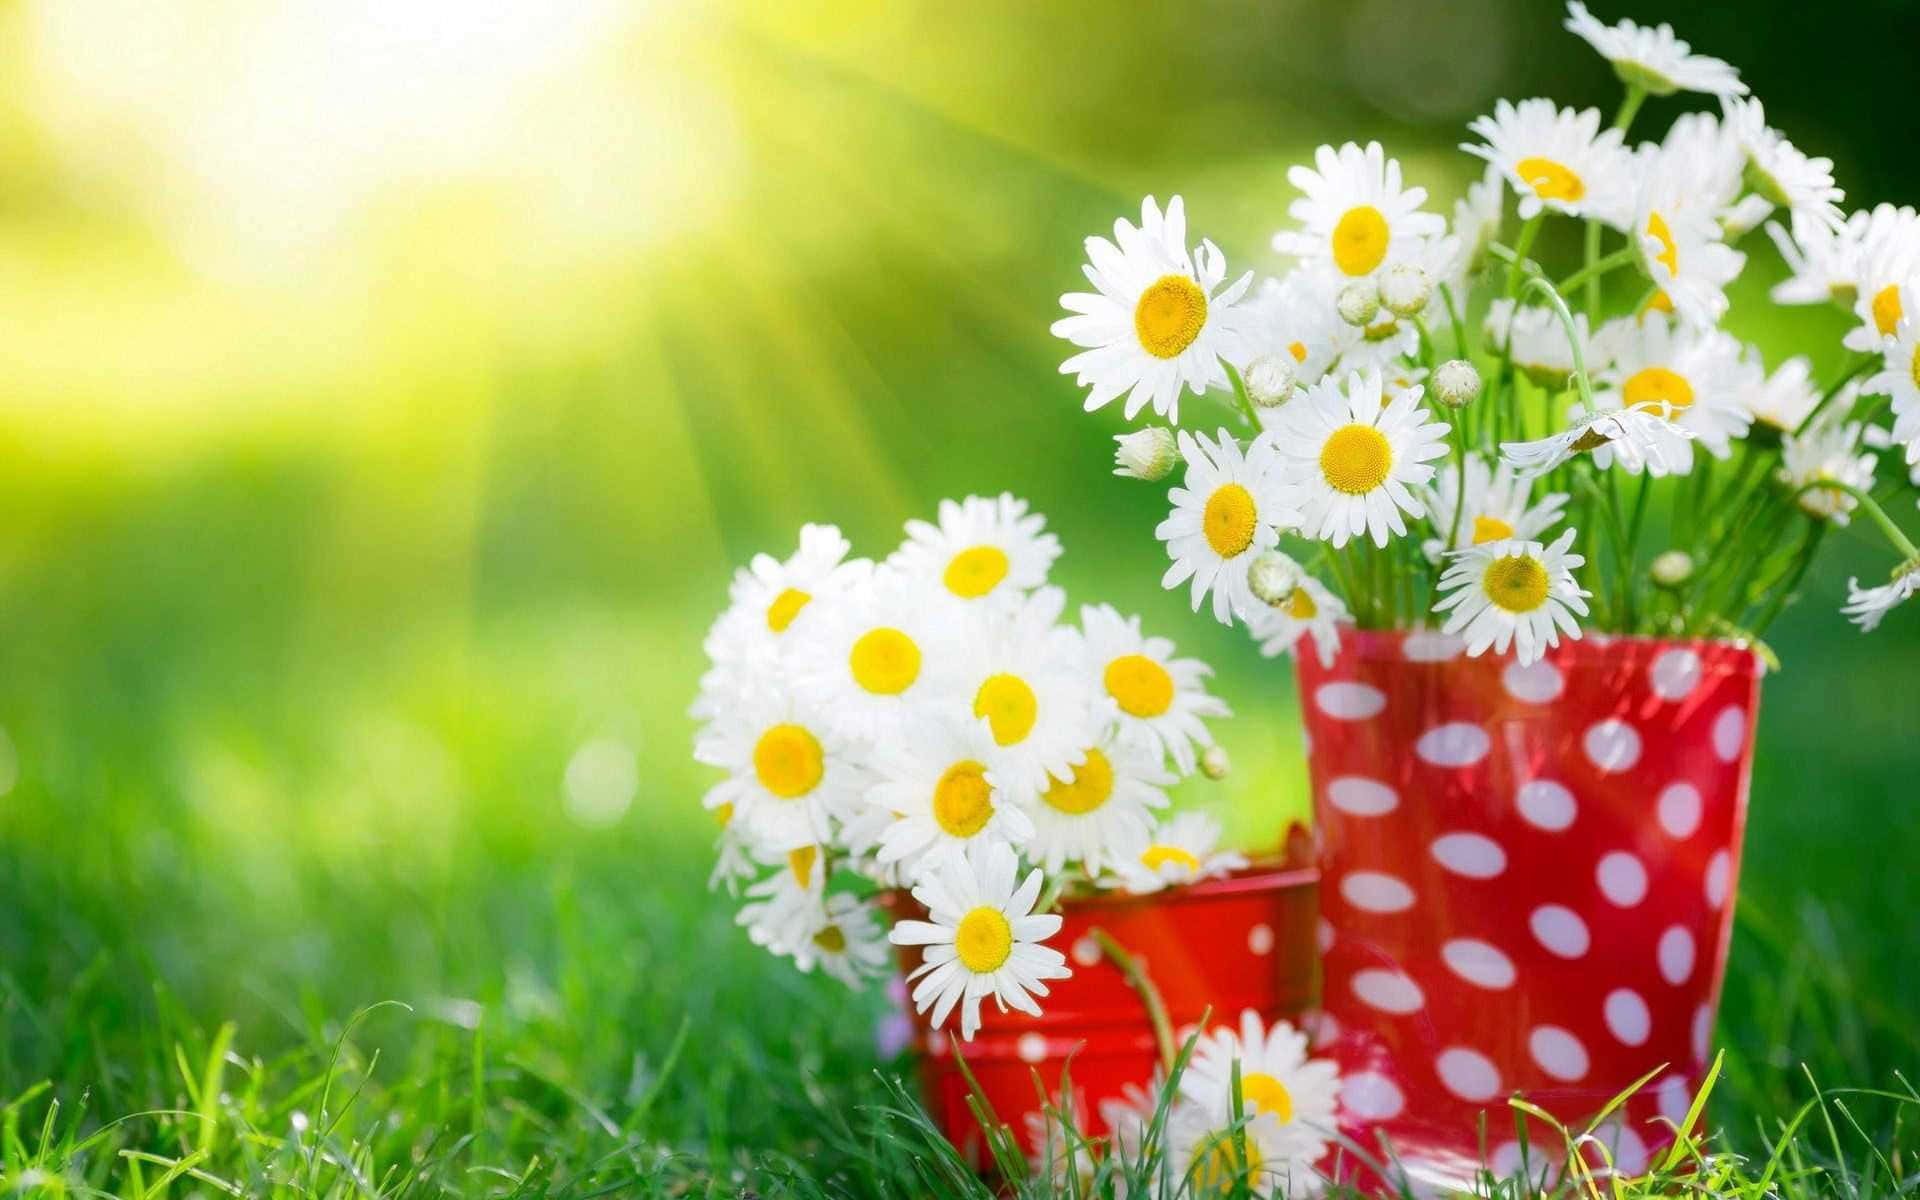 daisies in red polka dot vases on grass Wallpaper